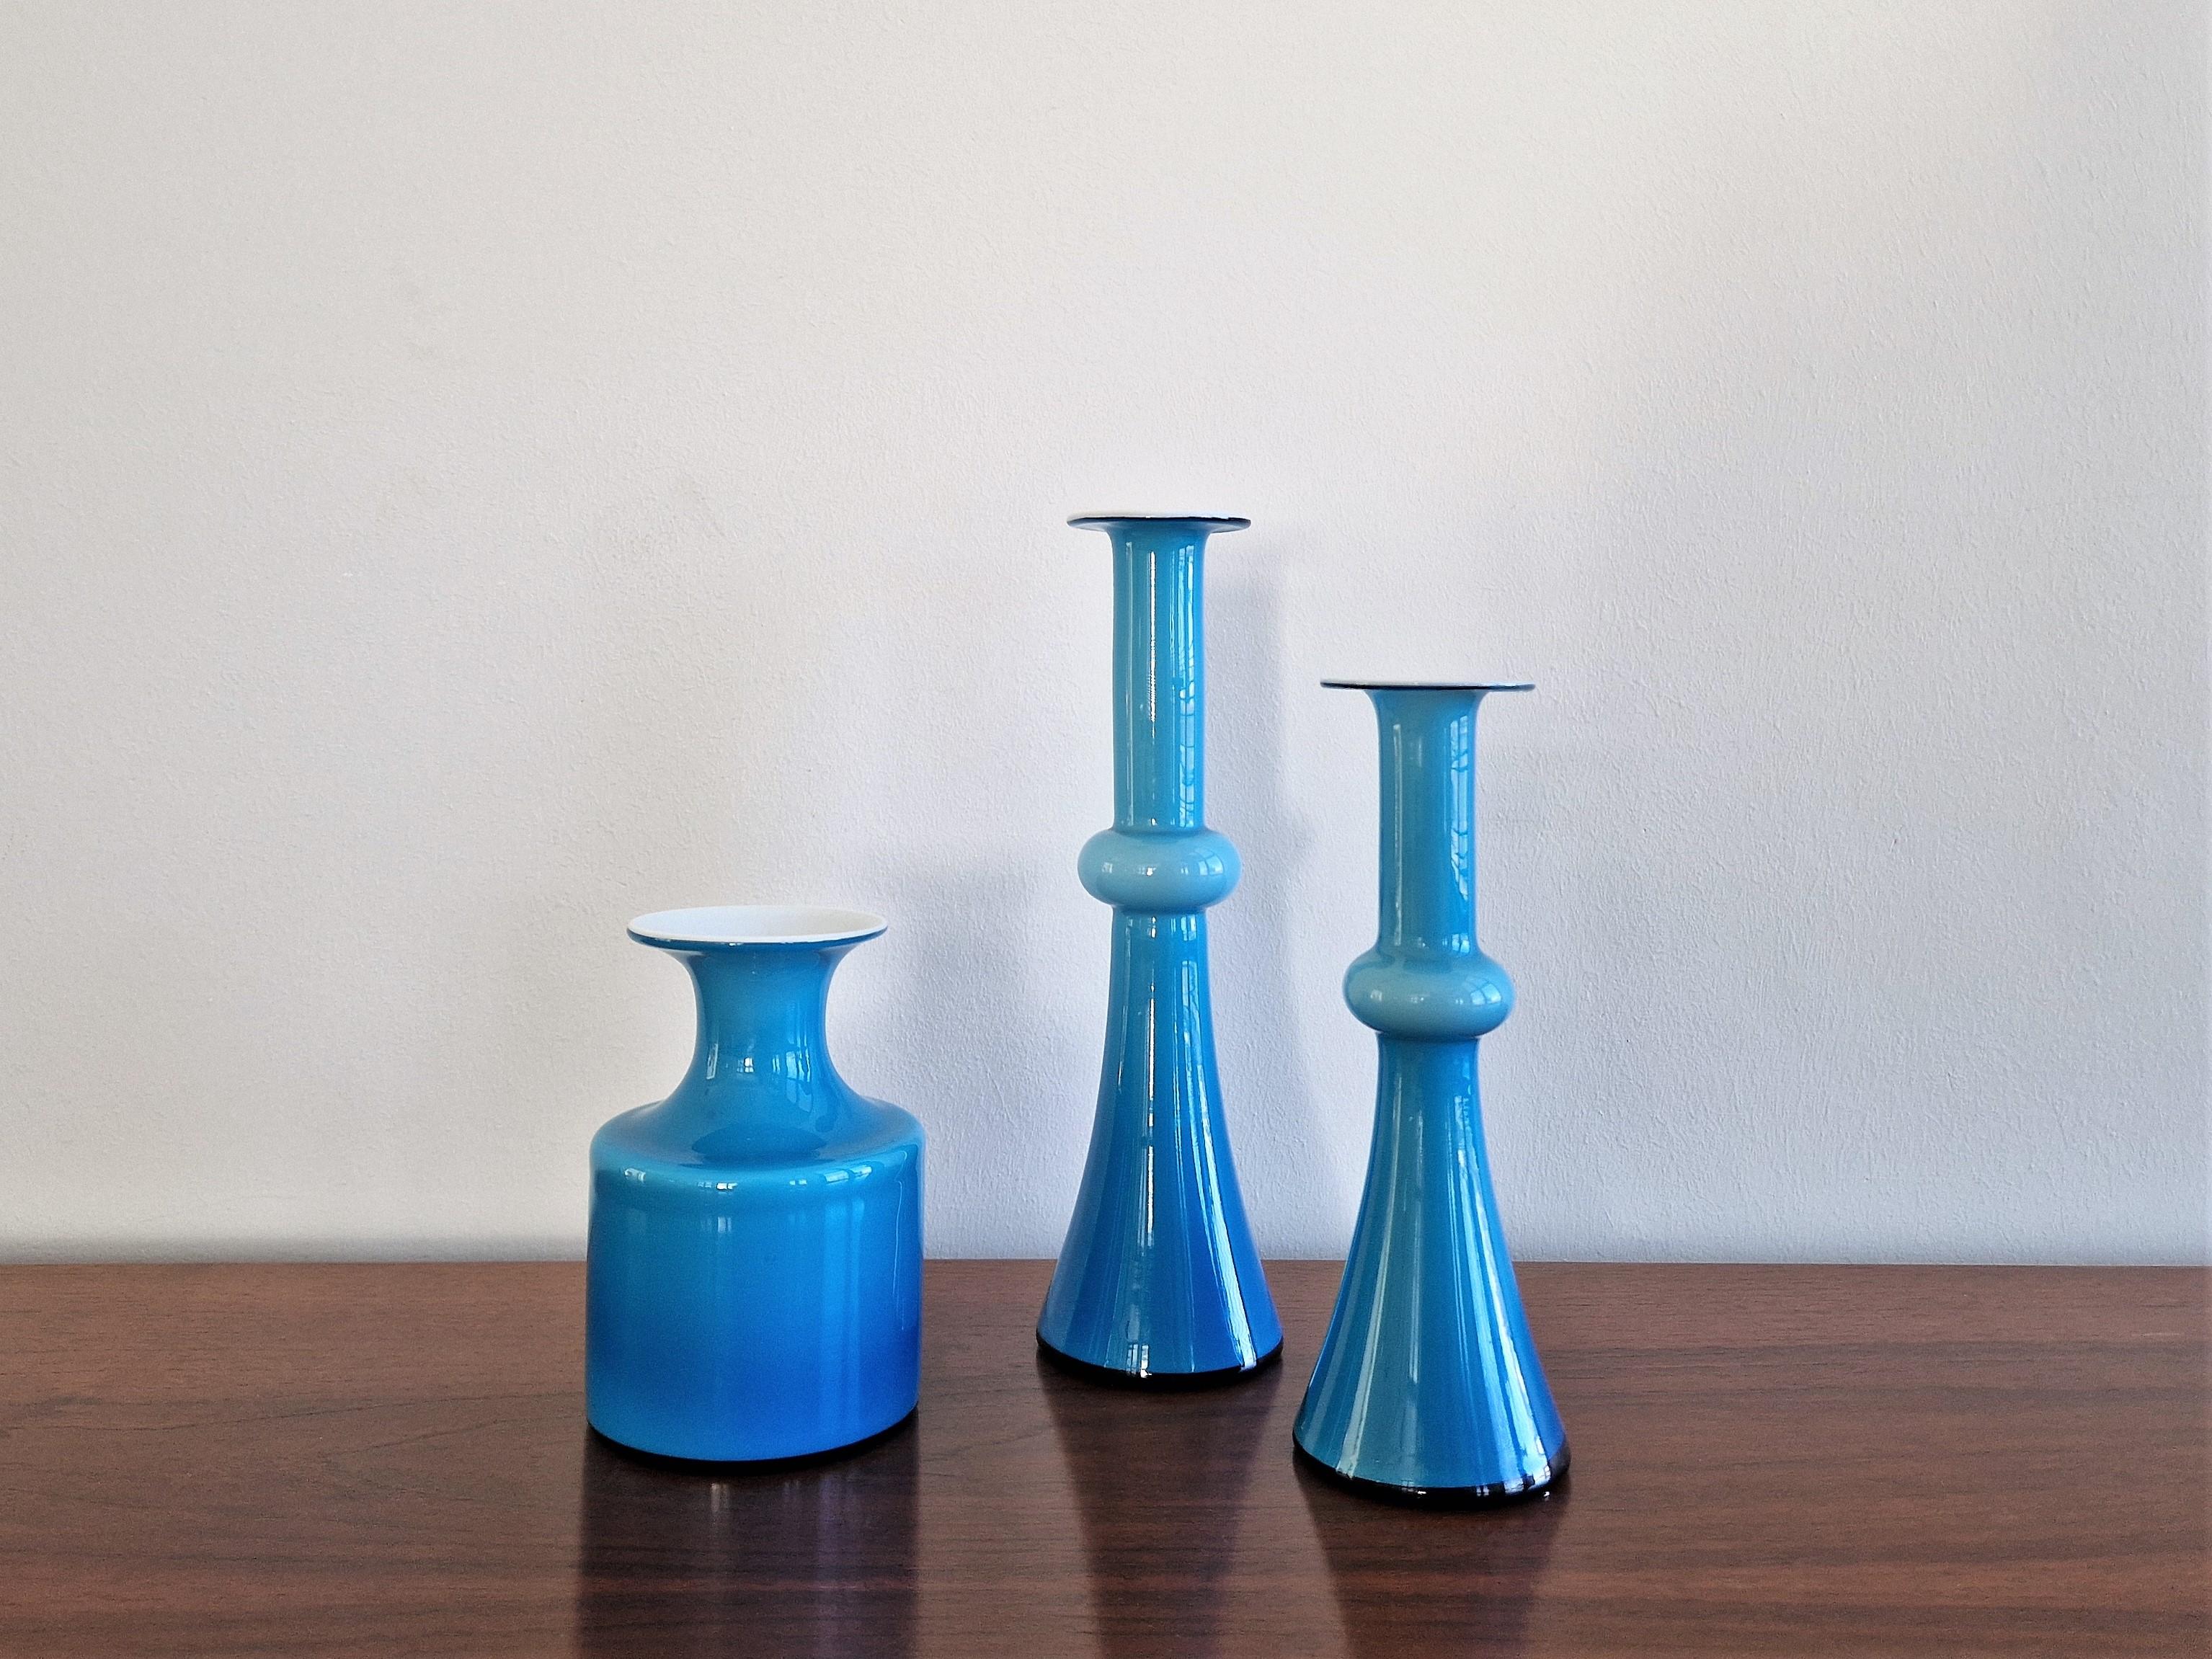 This is a stunning set of 3 blue glass Holmegaard vases with white inner casting from the Carnaby range, designed by Per Lütken. All in a very good condition, with minor signs of age and use. Measurements: slim vase (small): H 21 cm, ø 7.3 cm, slim